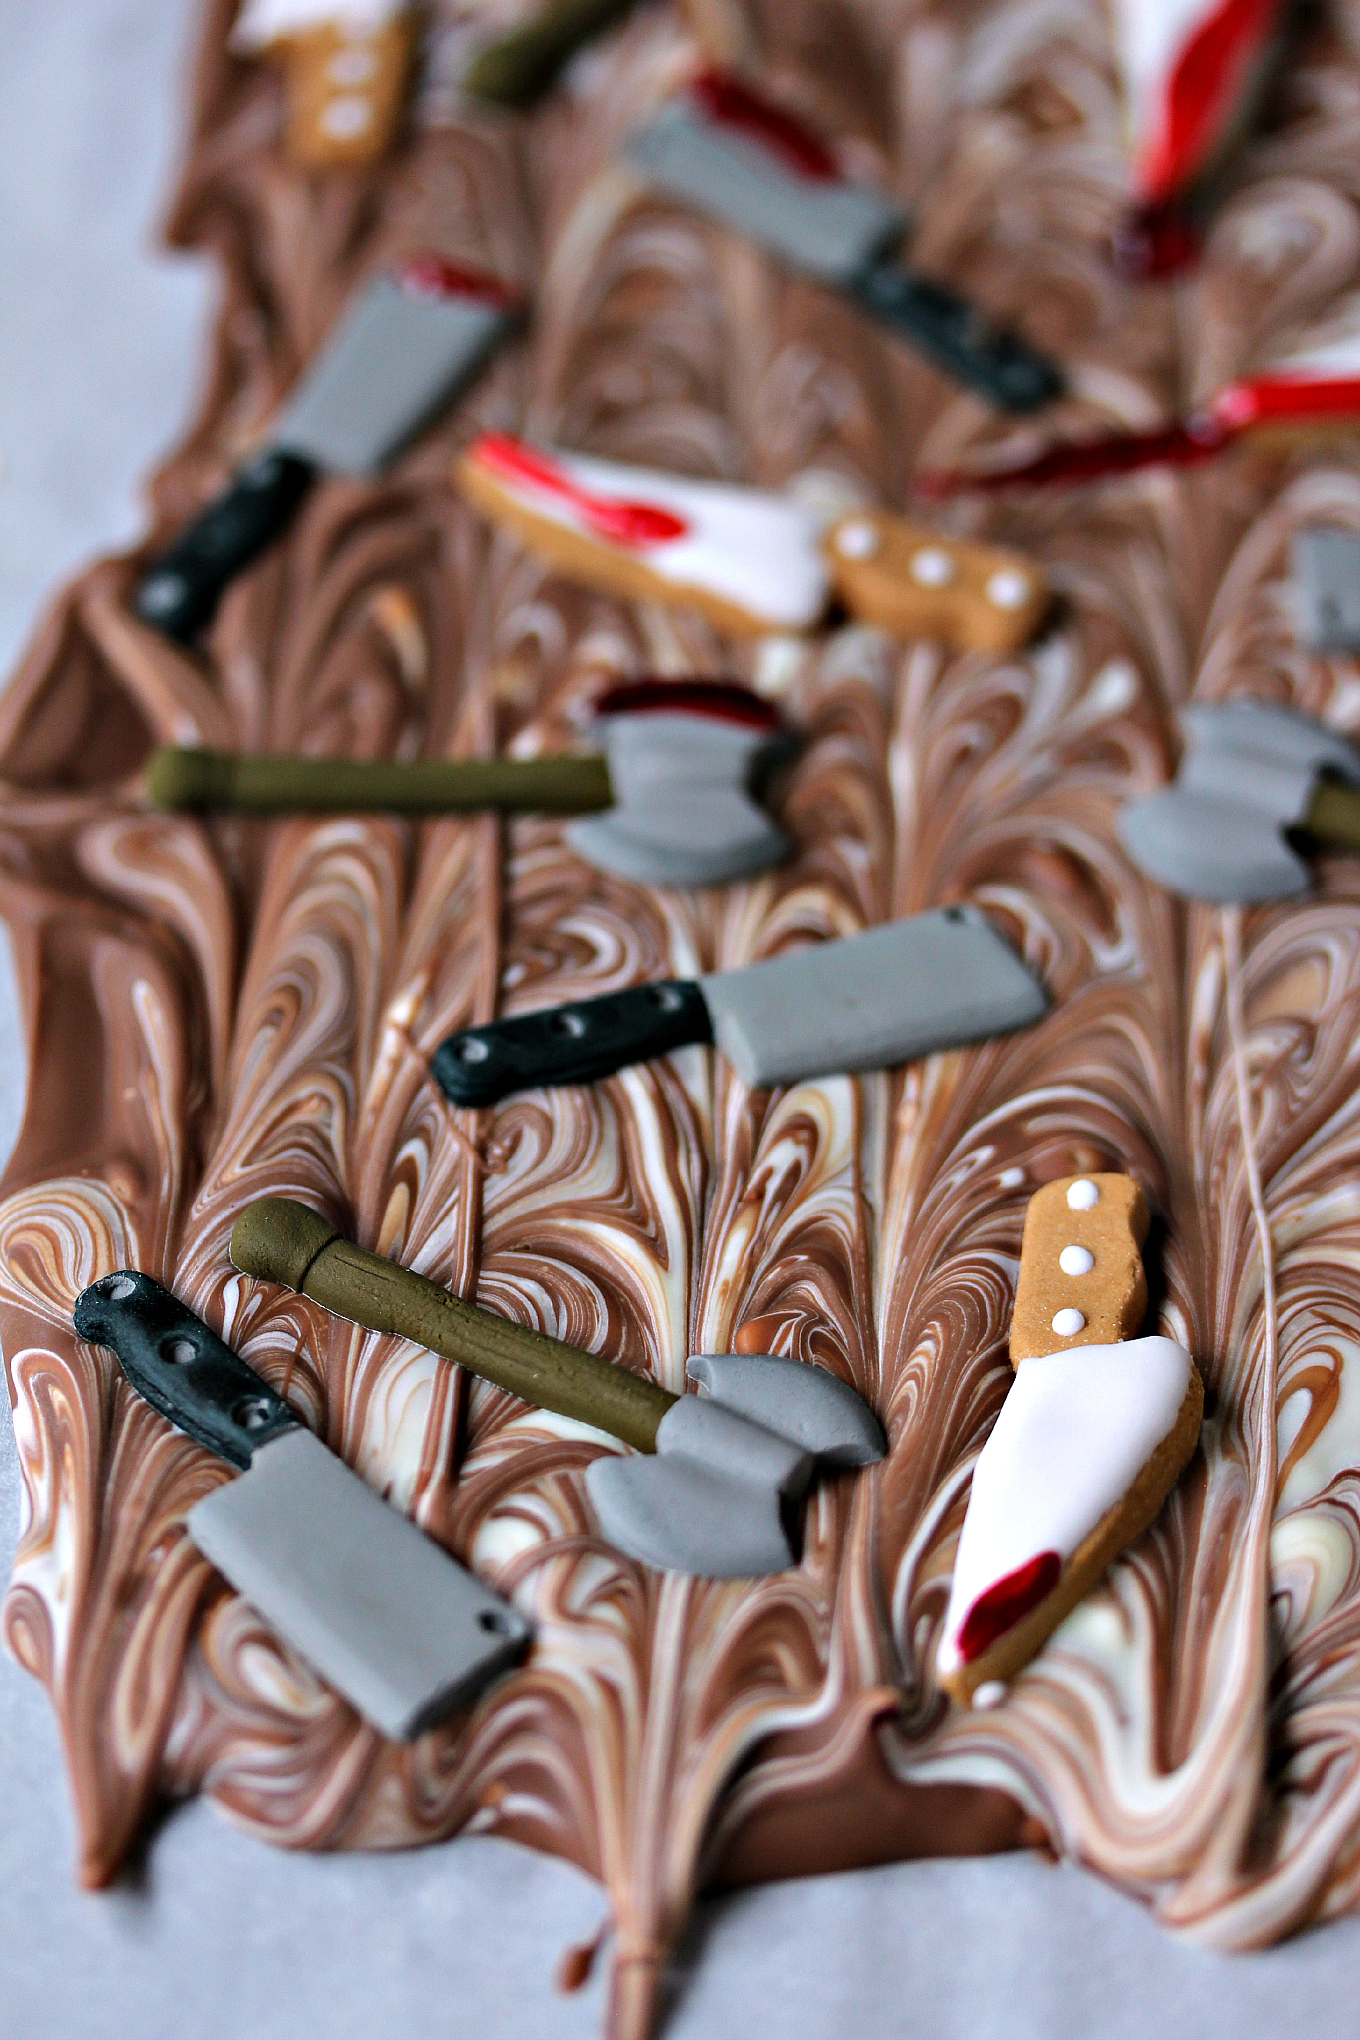 Chocolate Weapons Bark- Even during the apocalypse you're still going to crave chocolate. So make sure you're always prepared for zombie battles with this easy to make chocolate bark layered with zombie killing weapons. Try this Weapons Chocolate Bark for Dead Eats: Recipes Inspired by The Walking Dead!